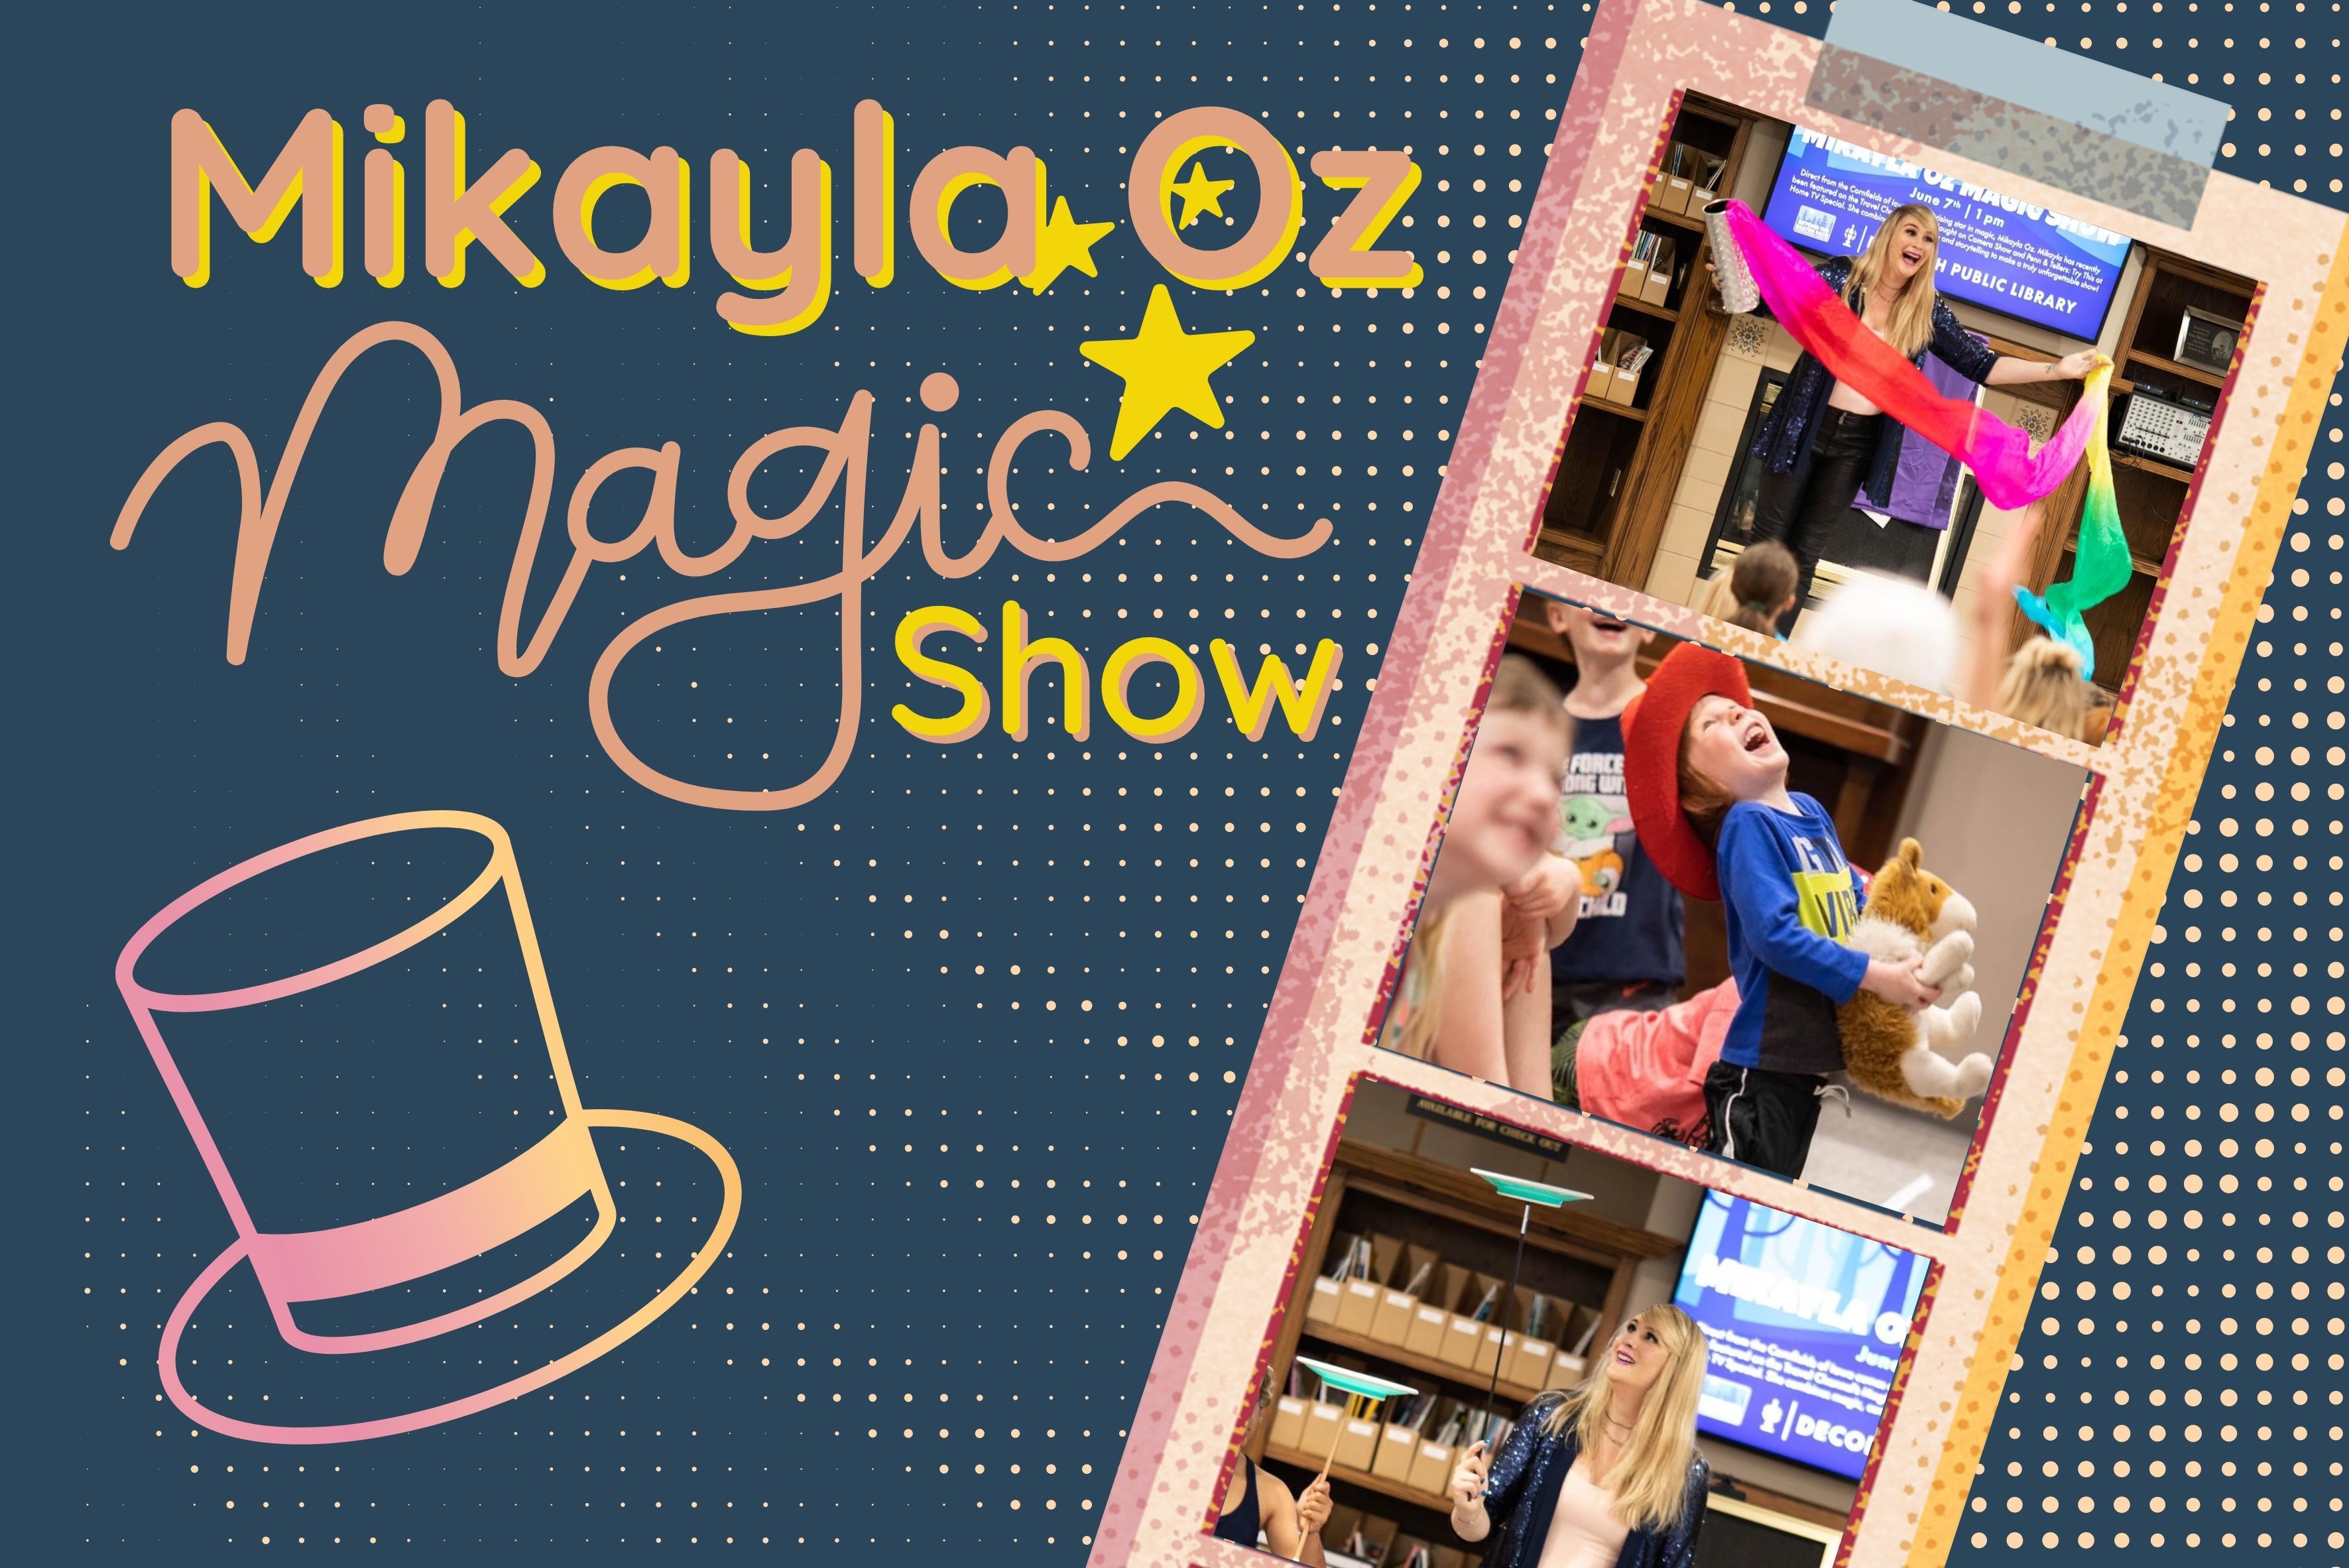 camera roll with performance images and Mikayla Oz Magic Show text